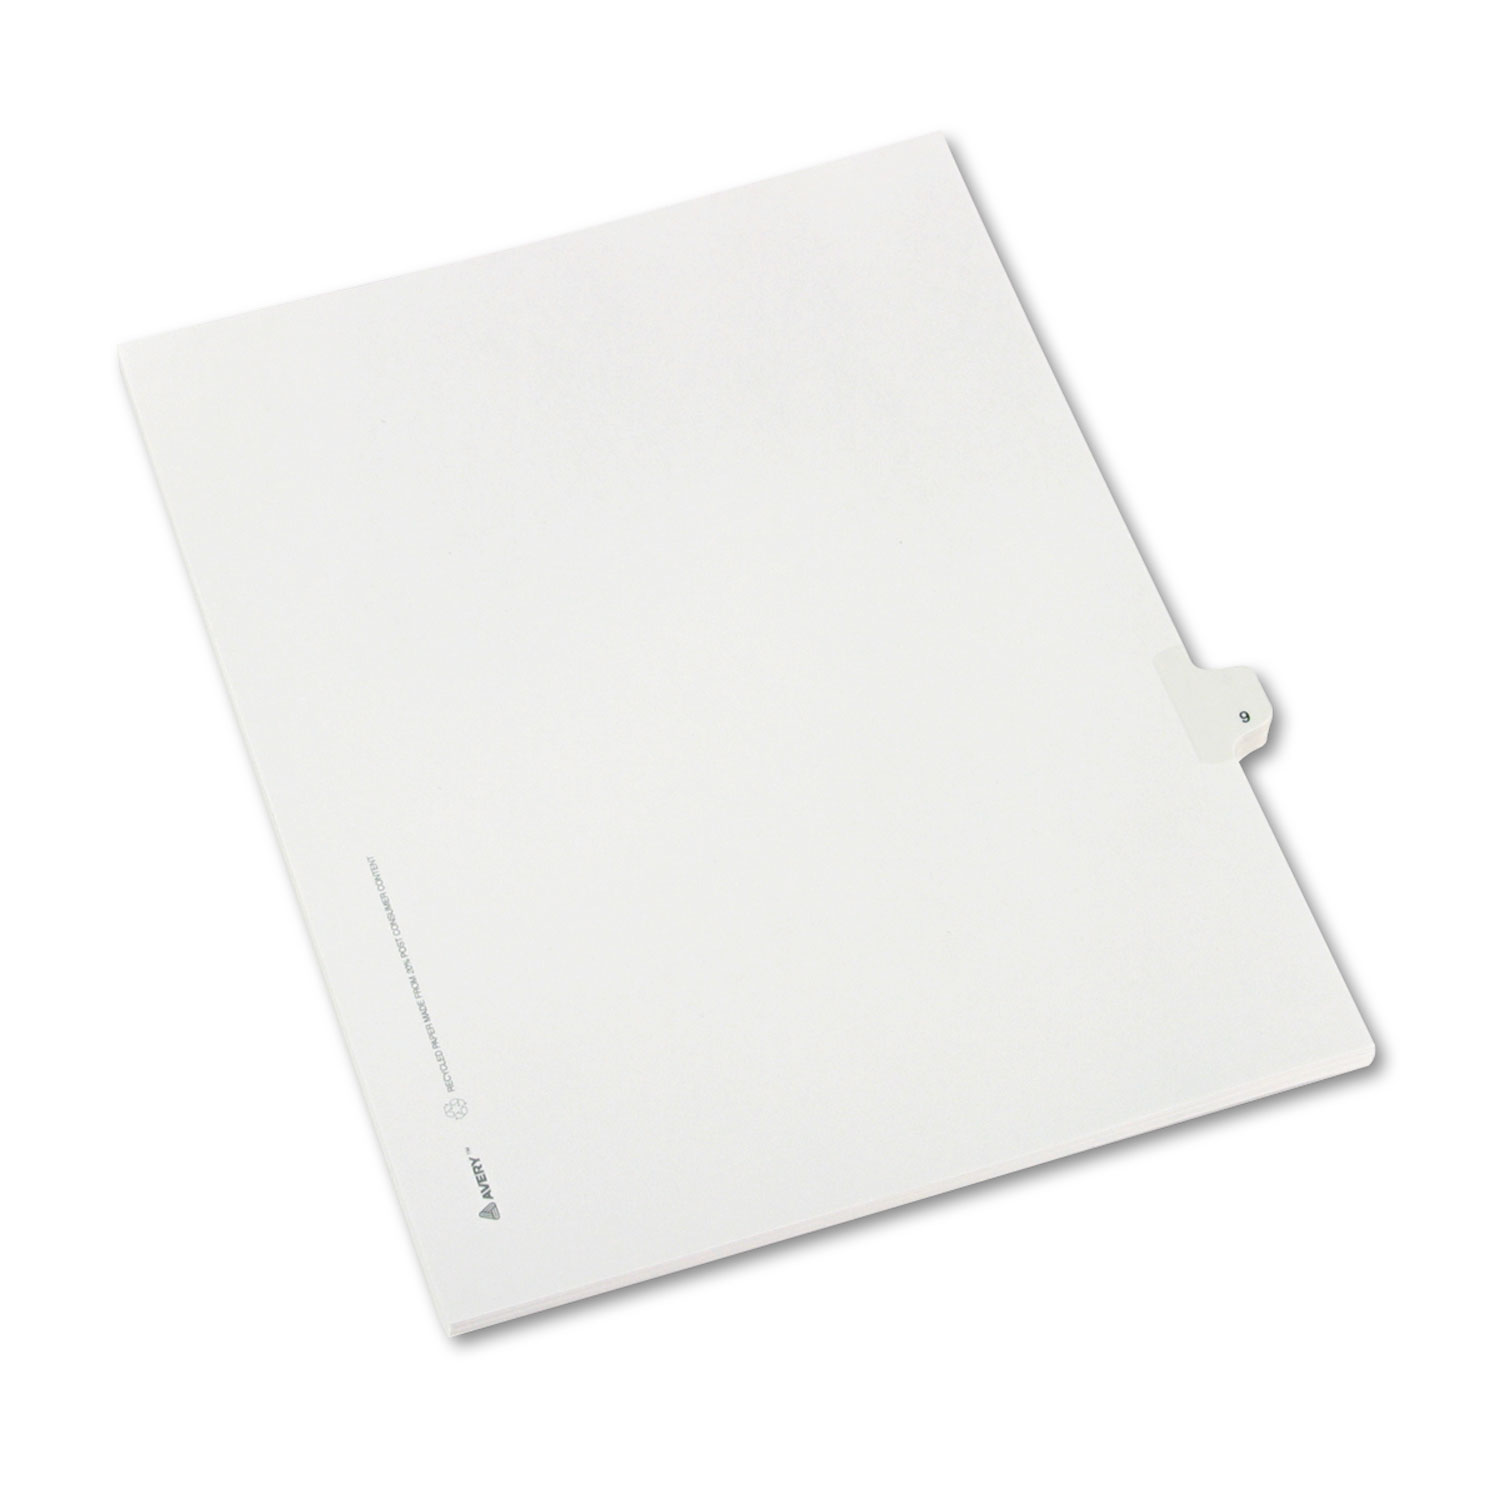 Allstate-Style Legal Exhibit Side Tab Divider, Title: 9, Letter, White, 25/Pack